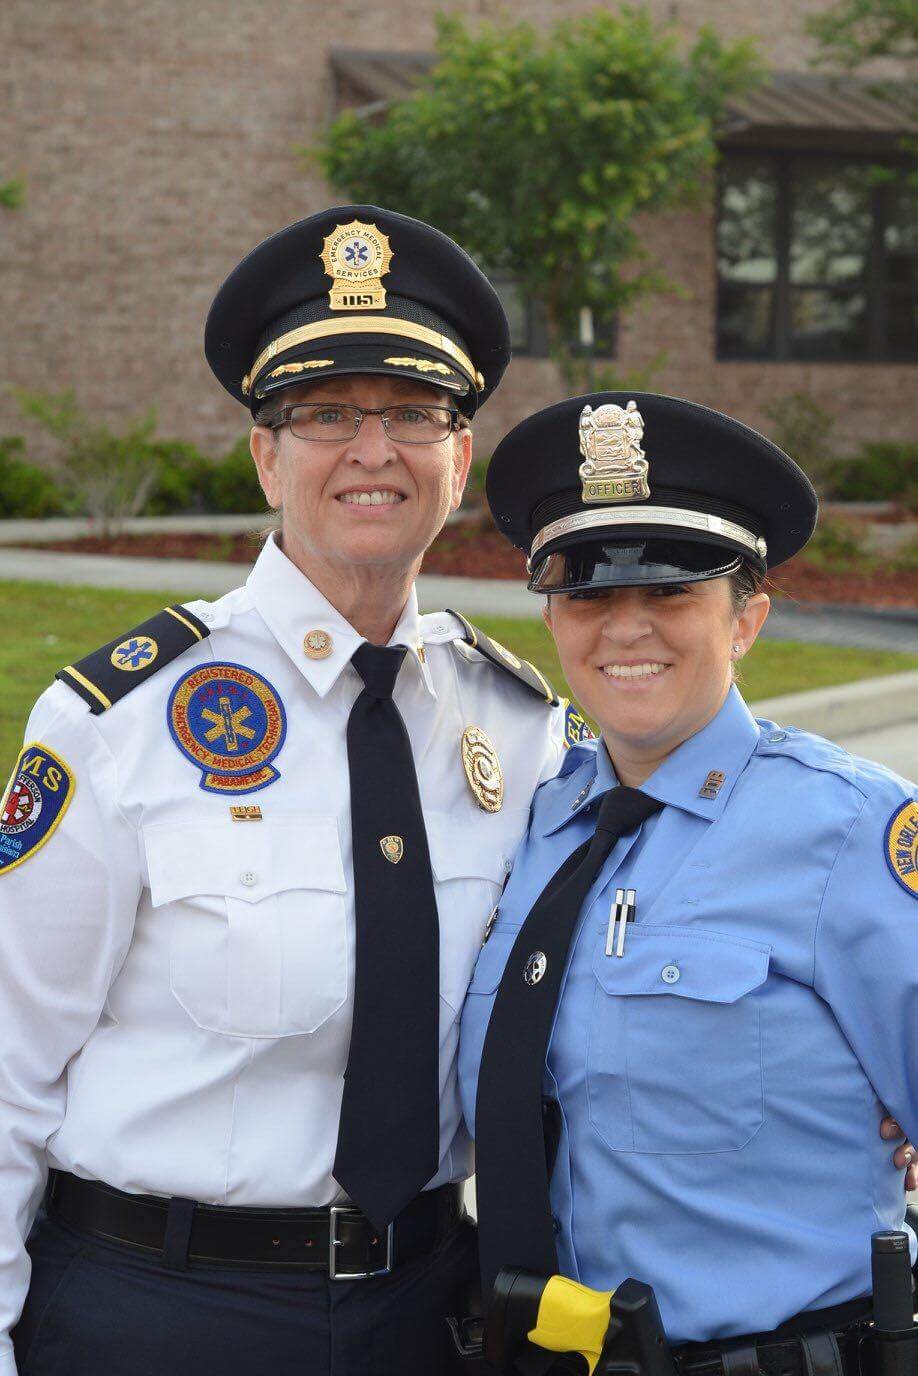 Two police staff smiling